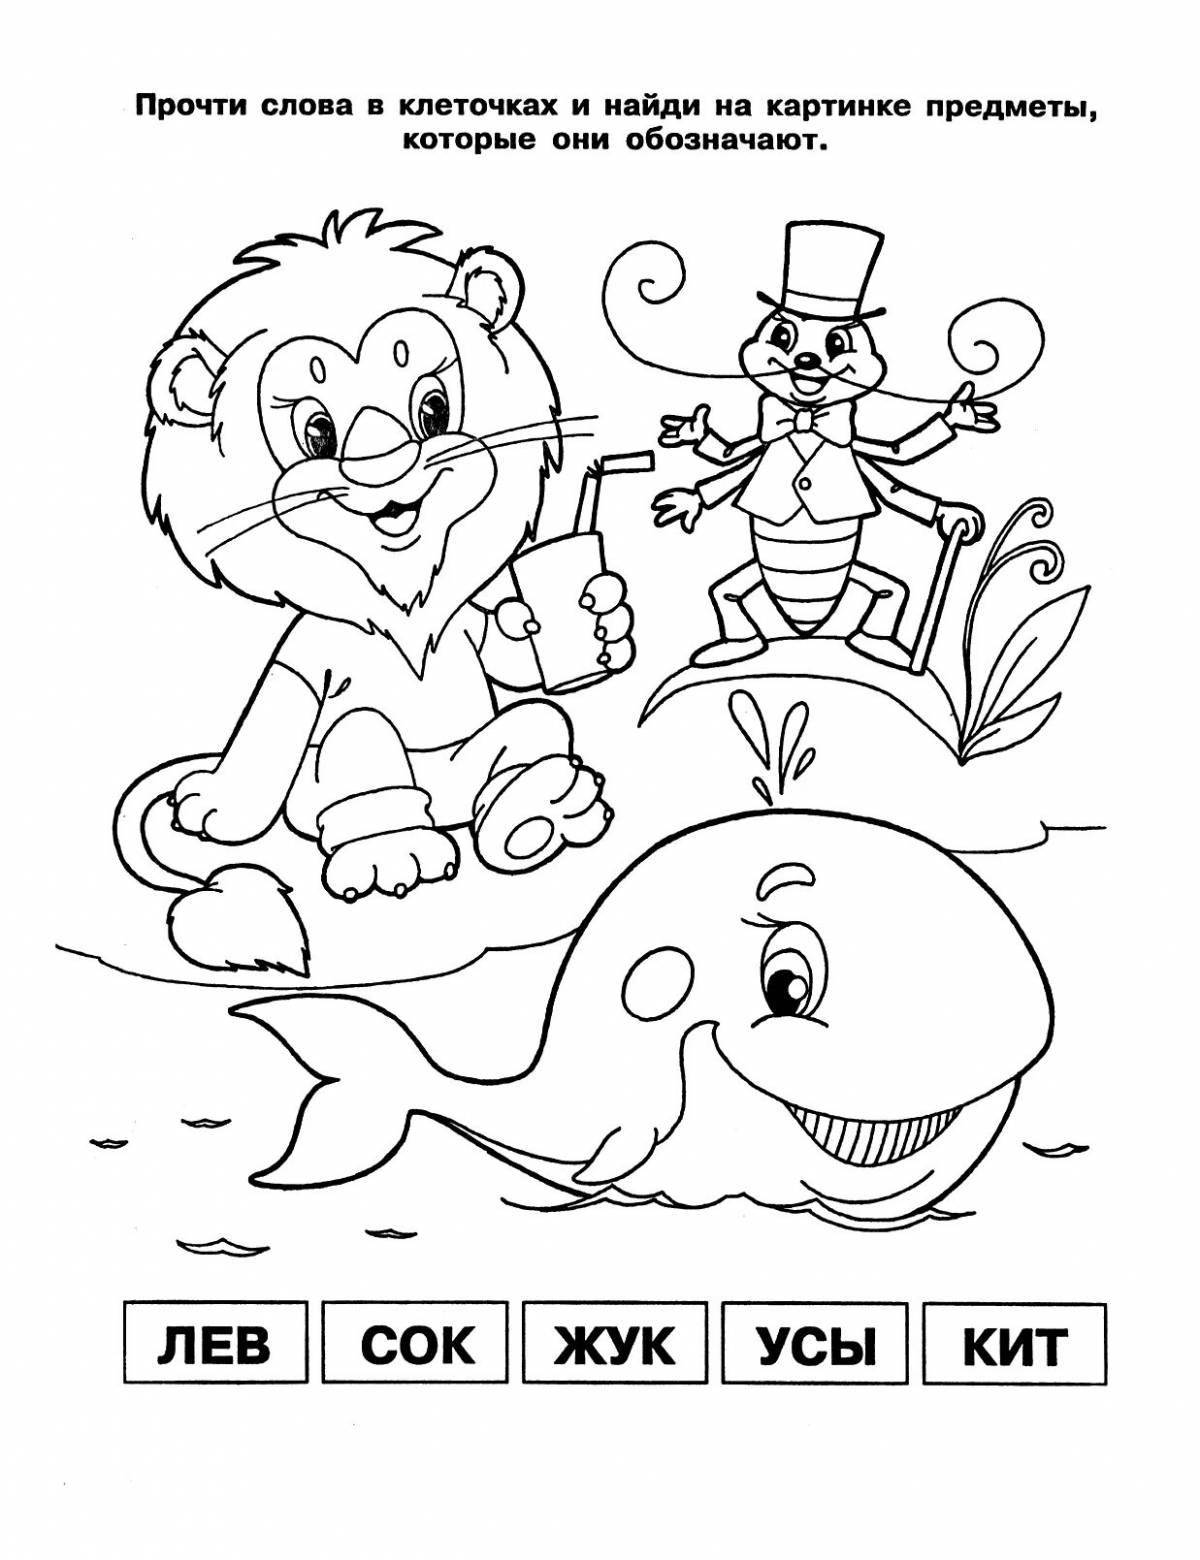 Coloring for joyful syllables for preschoolers